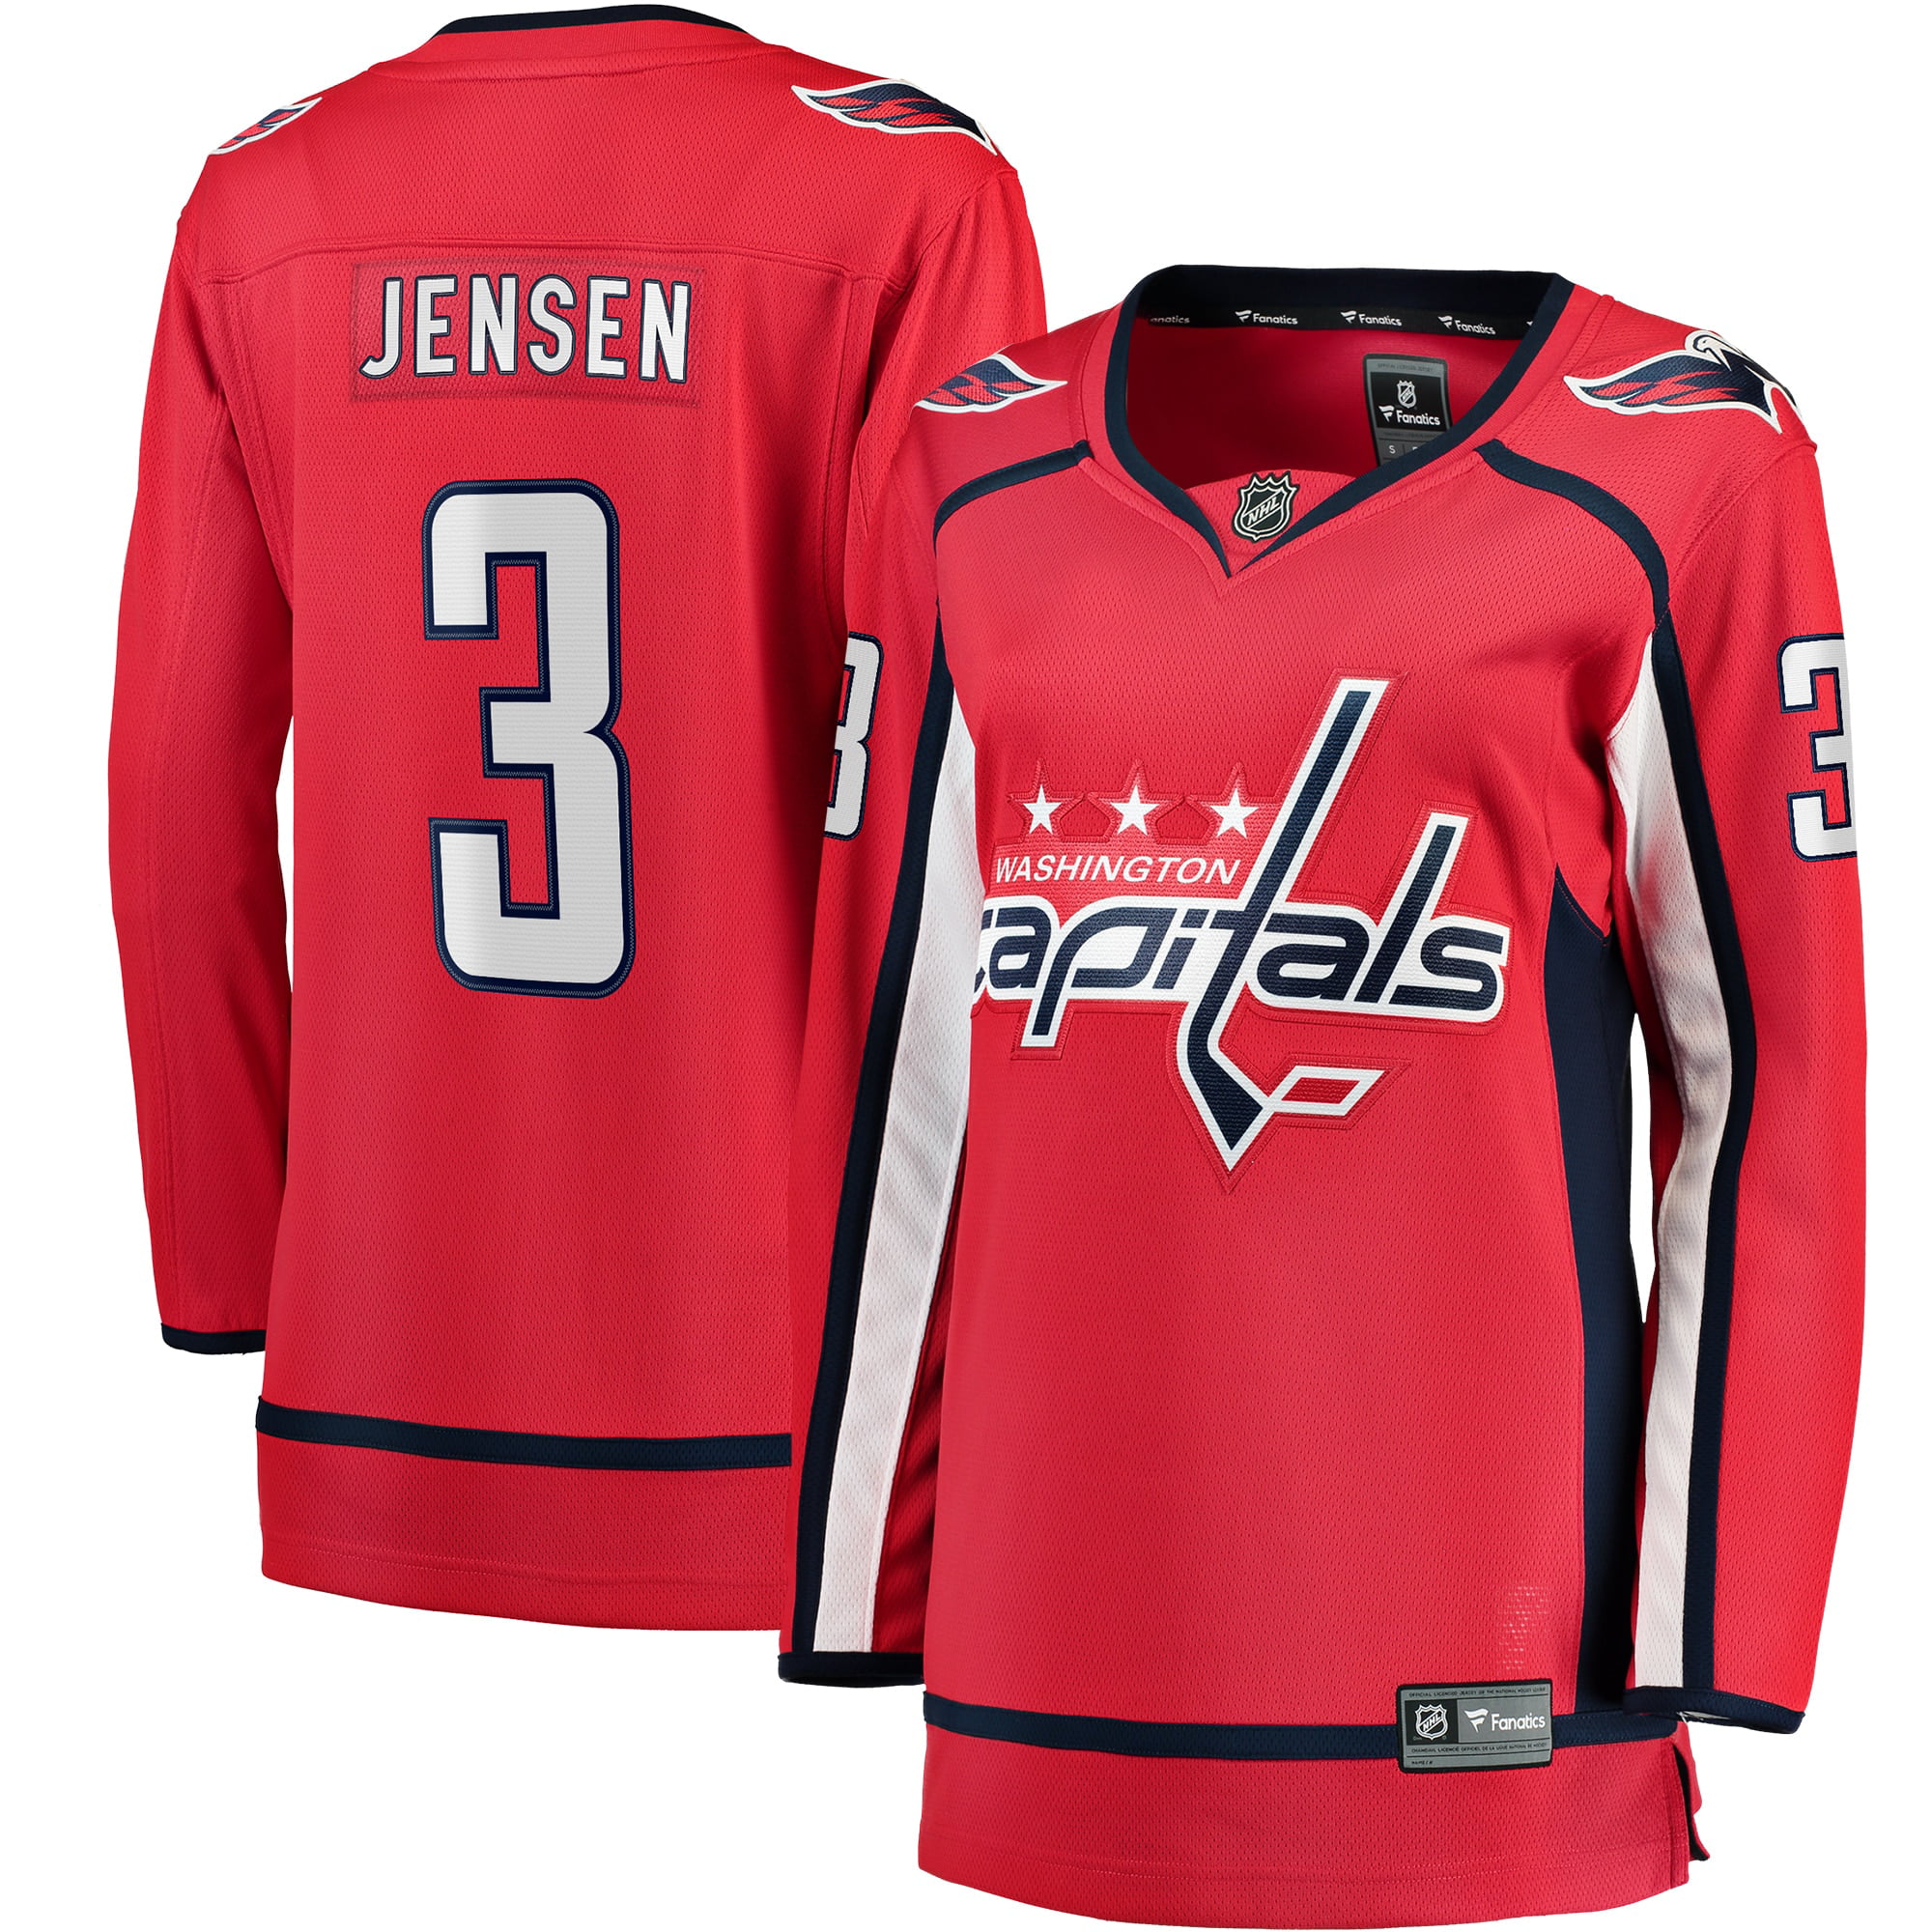 capitals white jersey